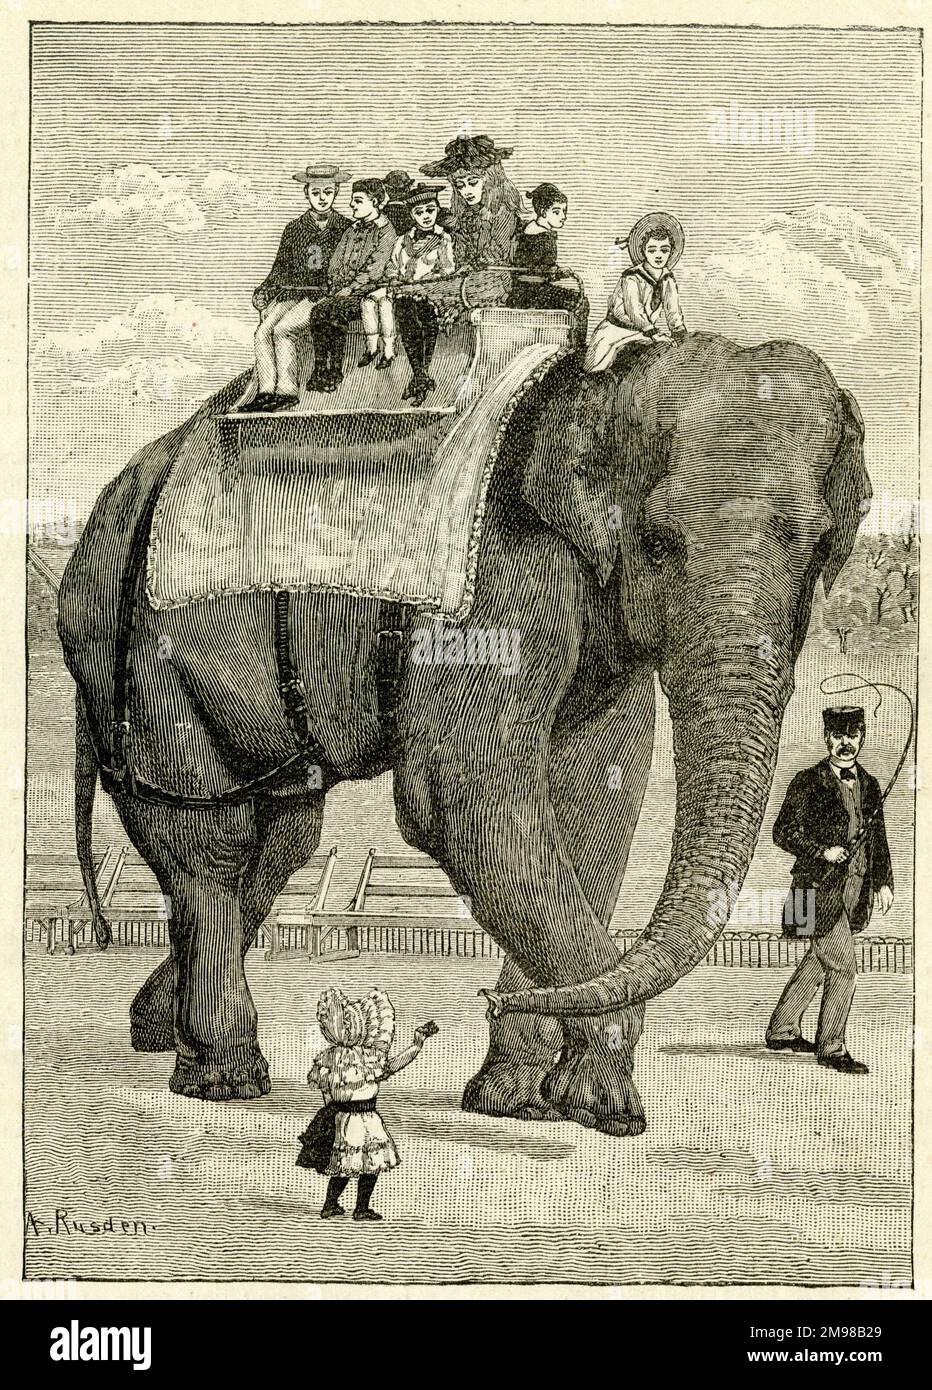 Jumbo the elephant giving children a ride at the zoo. Stock Photo